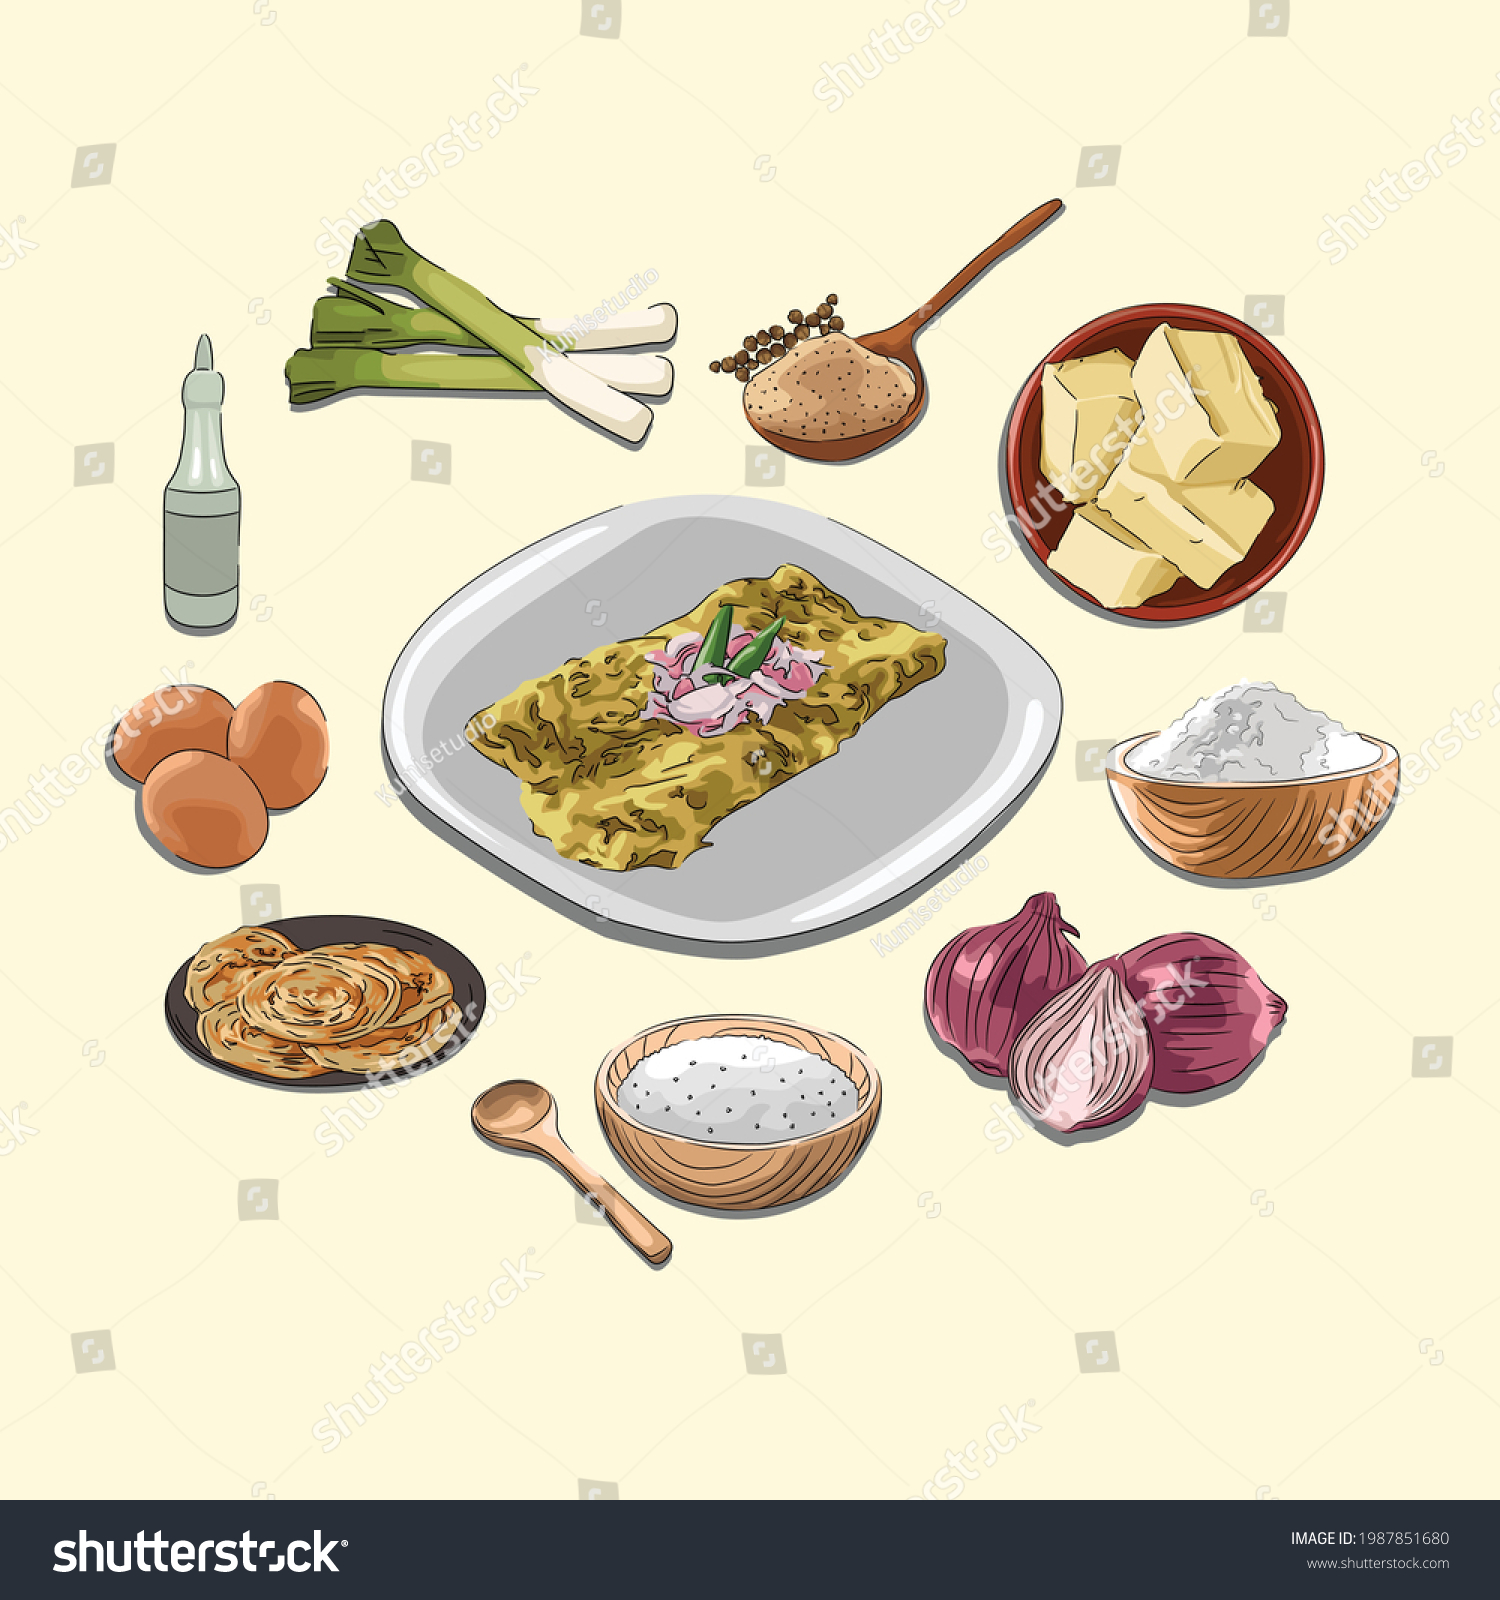 SVG of Martabak Aceh Khas Aceh And Ingredients, Sketch And Vector Style, Traditional Food From Aceh, Good to use for restaurant menu, Indonesian food recipe book, and food content. svg